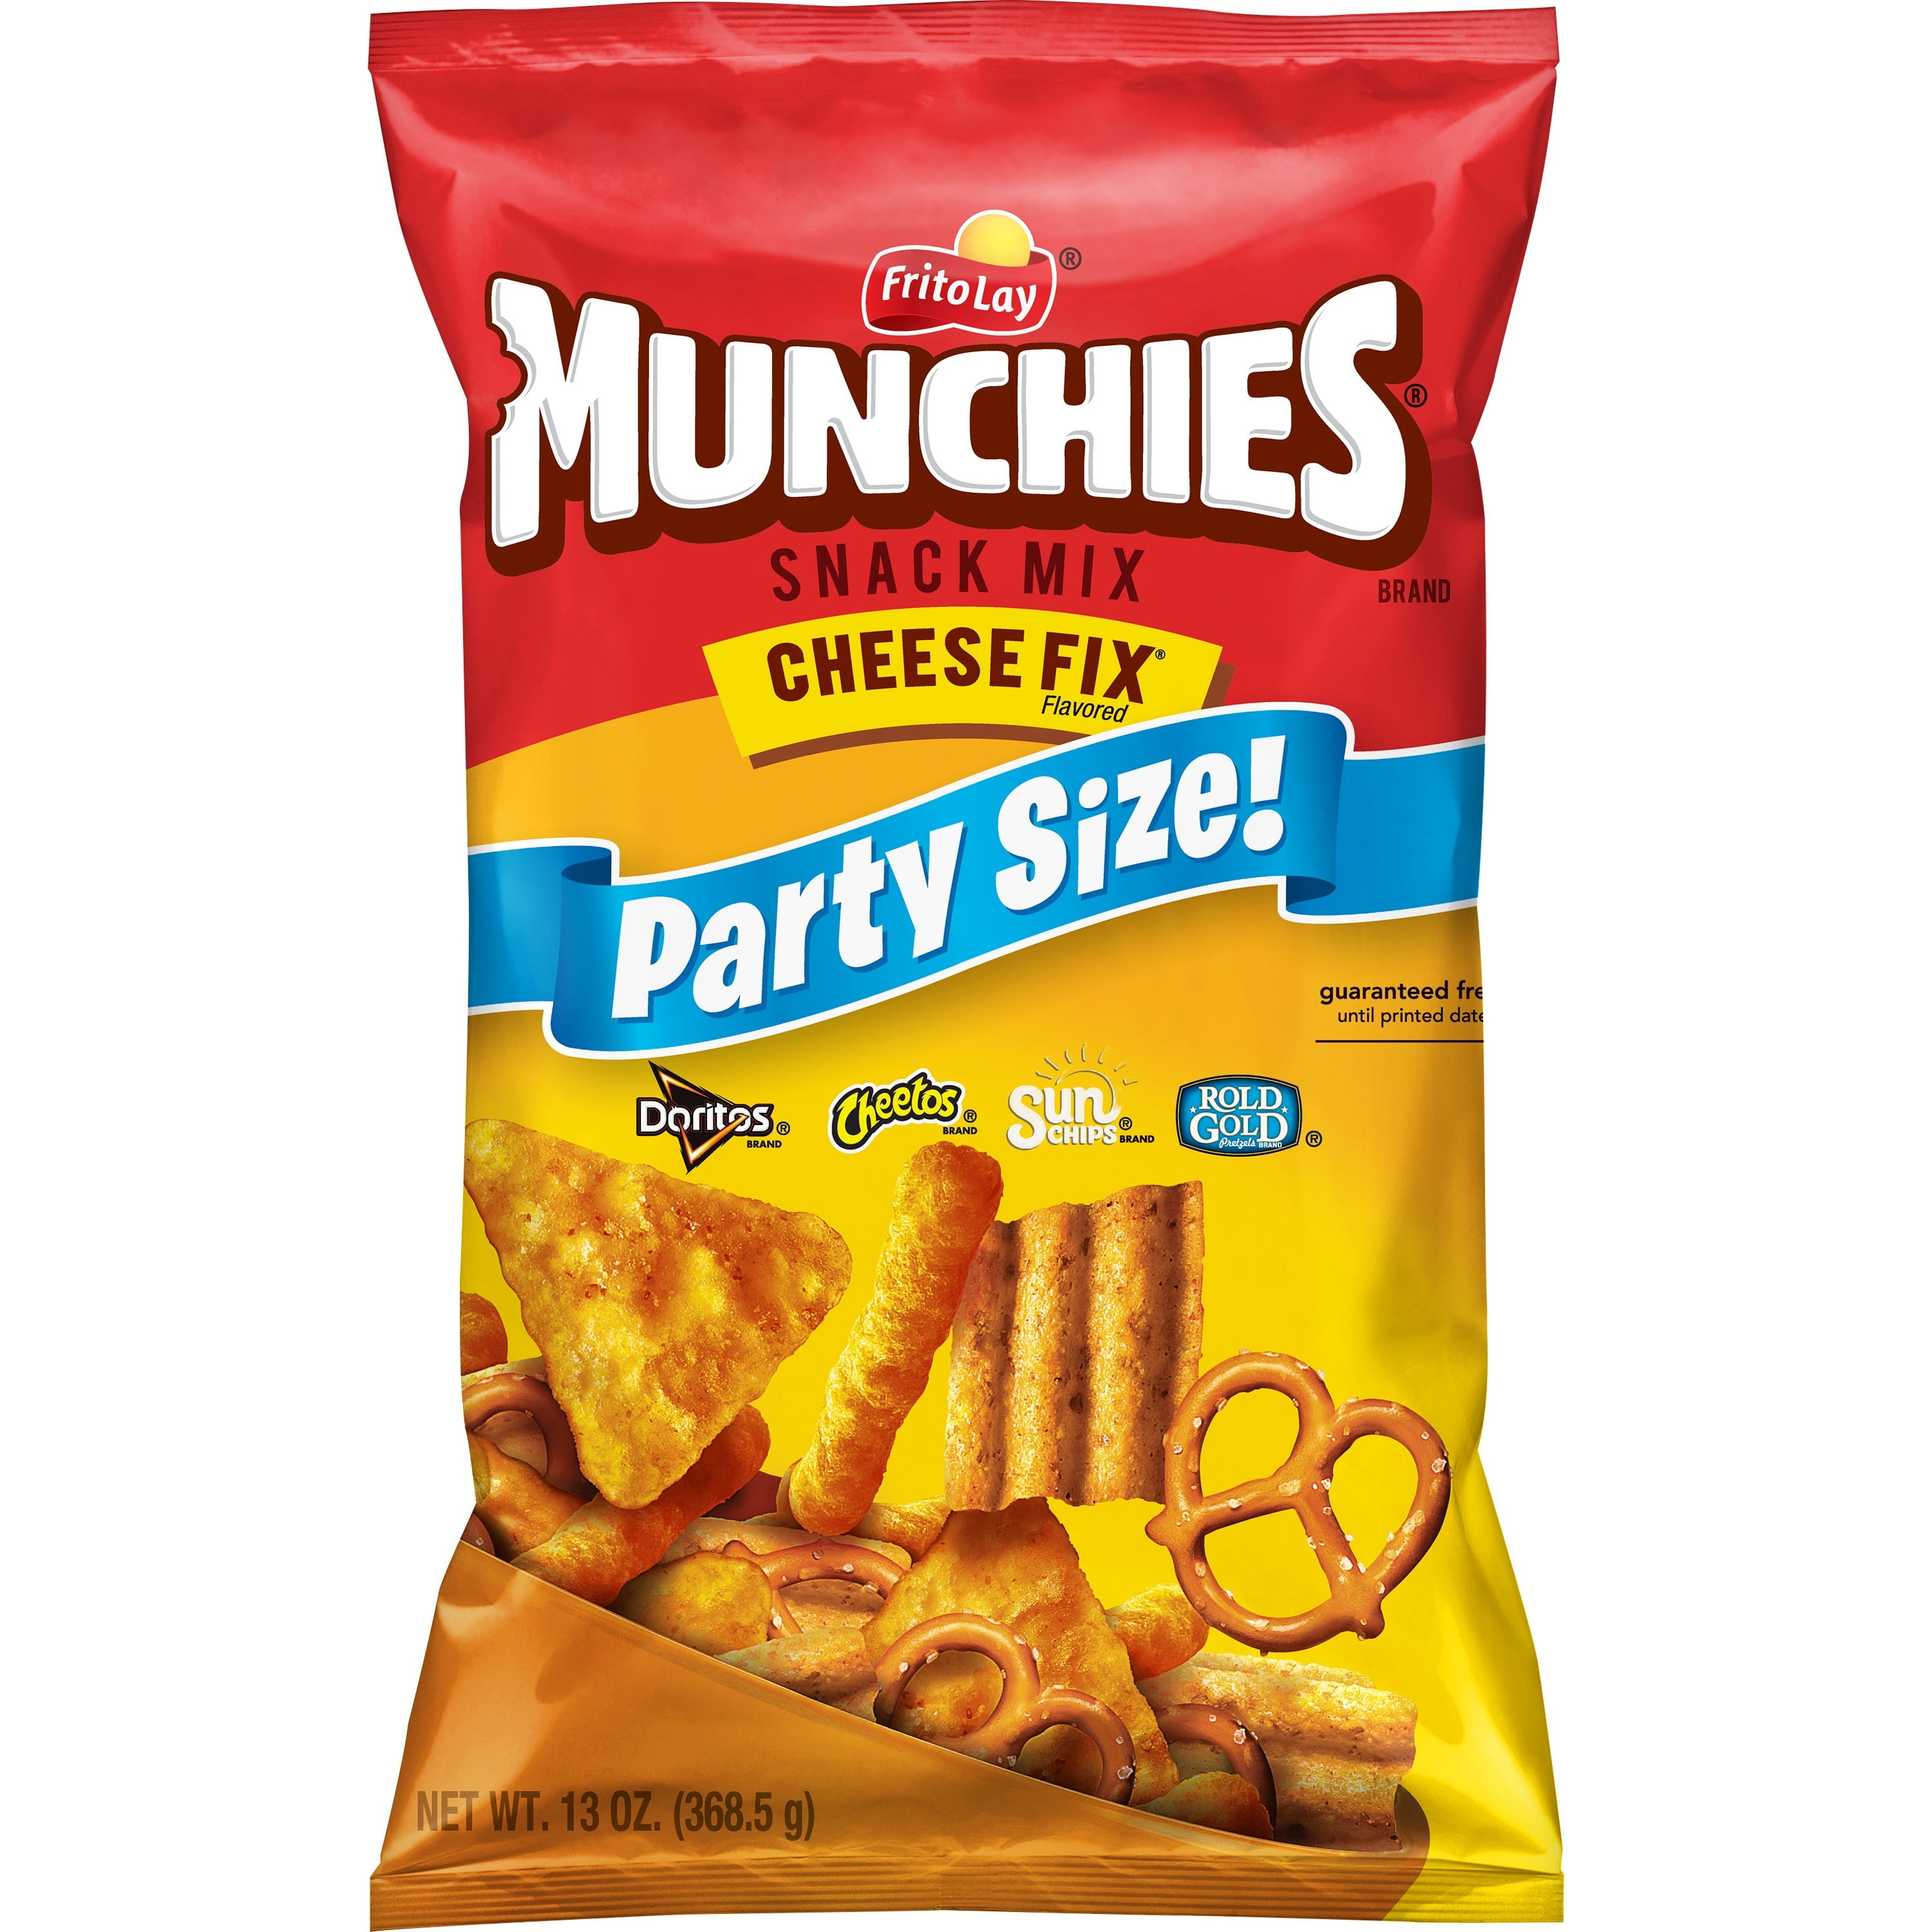 Munchies Cheese Fix, Party Size, 13 oz Bag